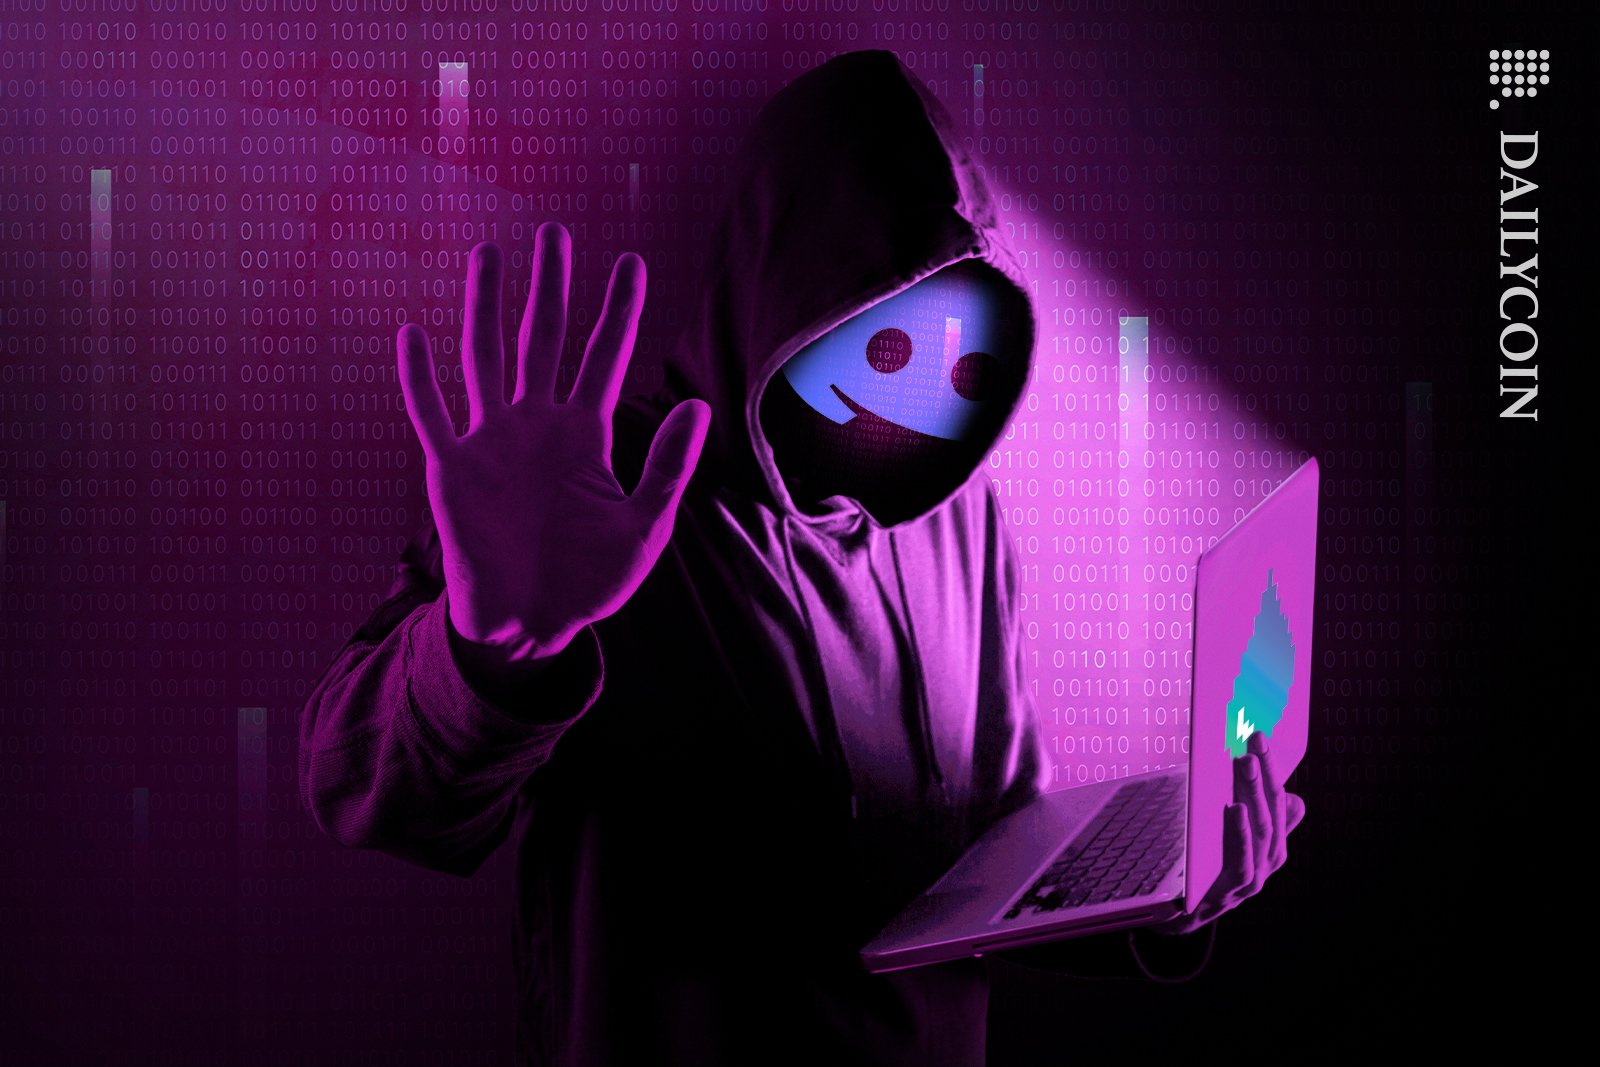 A hacker with laptop and a Discord logo mask holding his hand up.